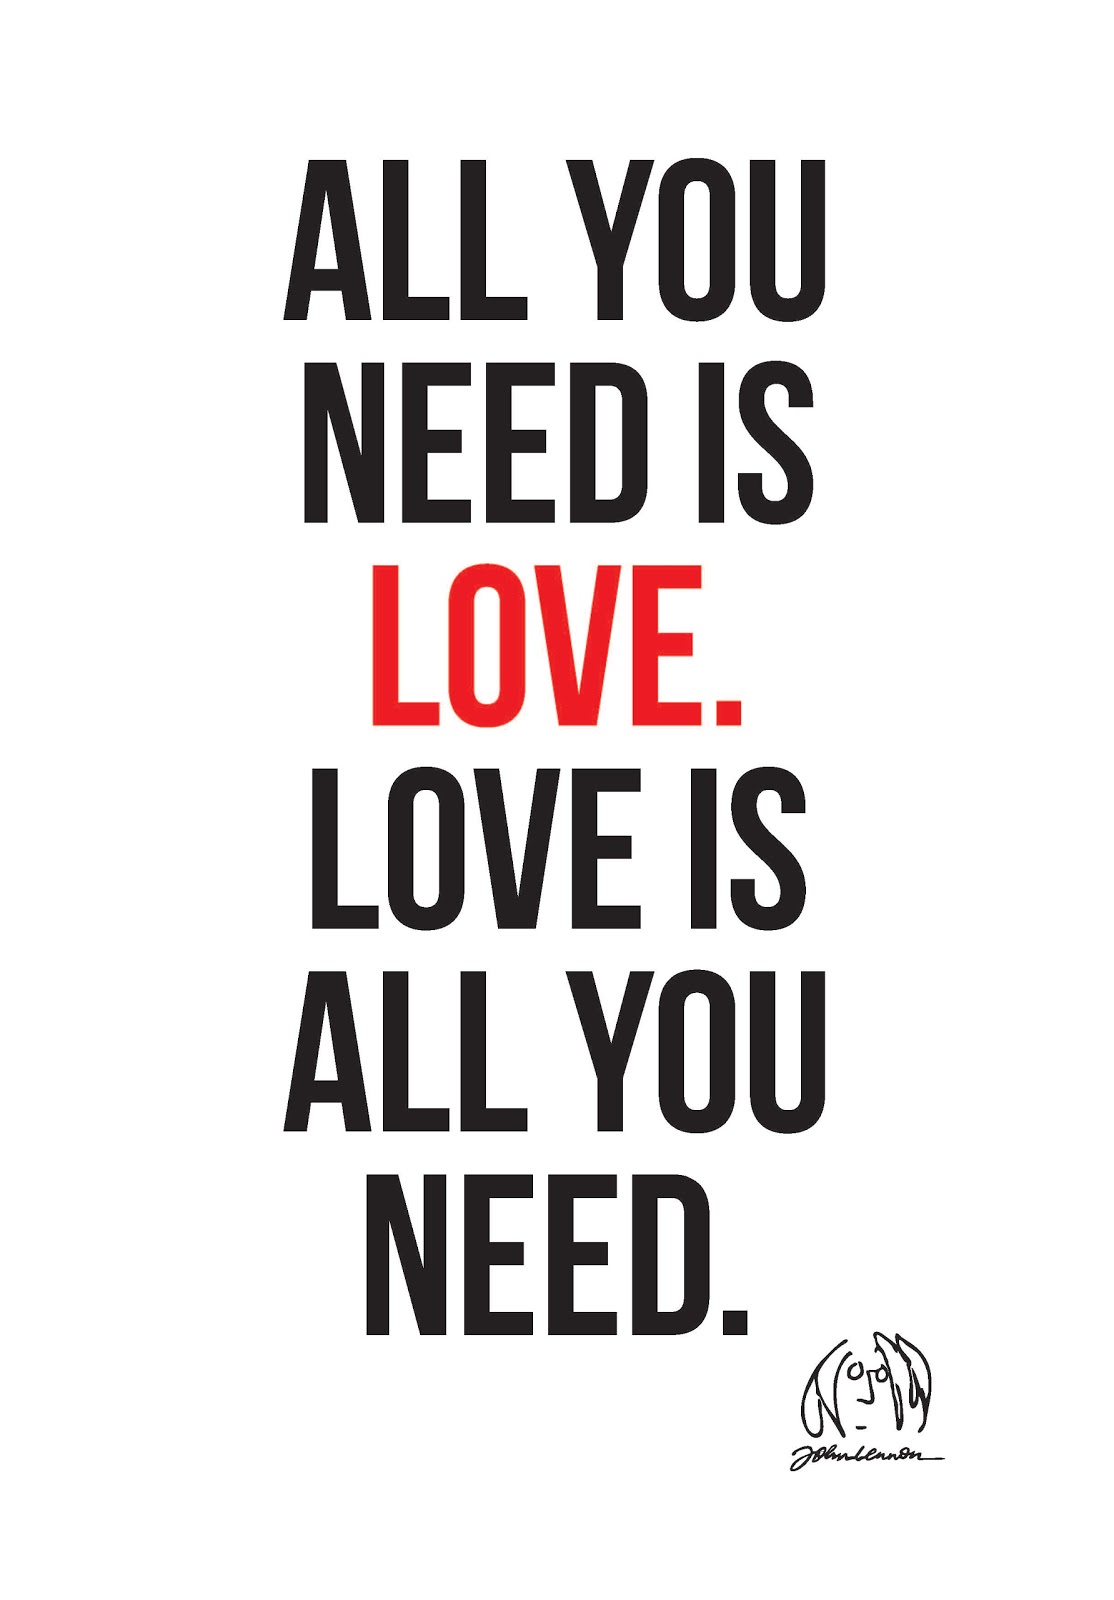 All You Need Is Love - Wikipedia